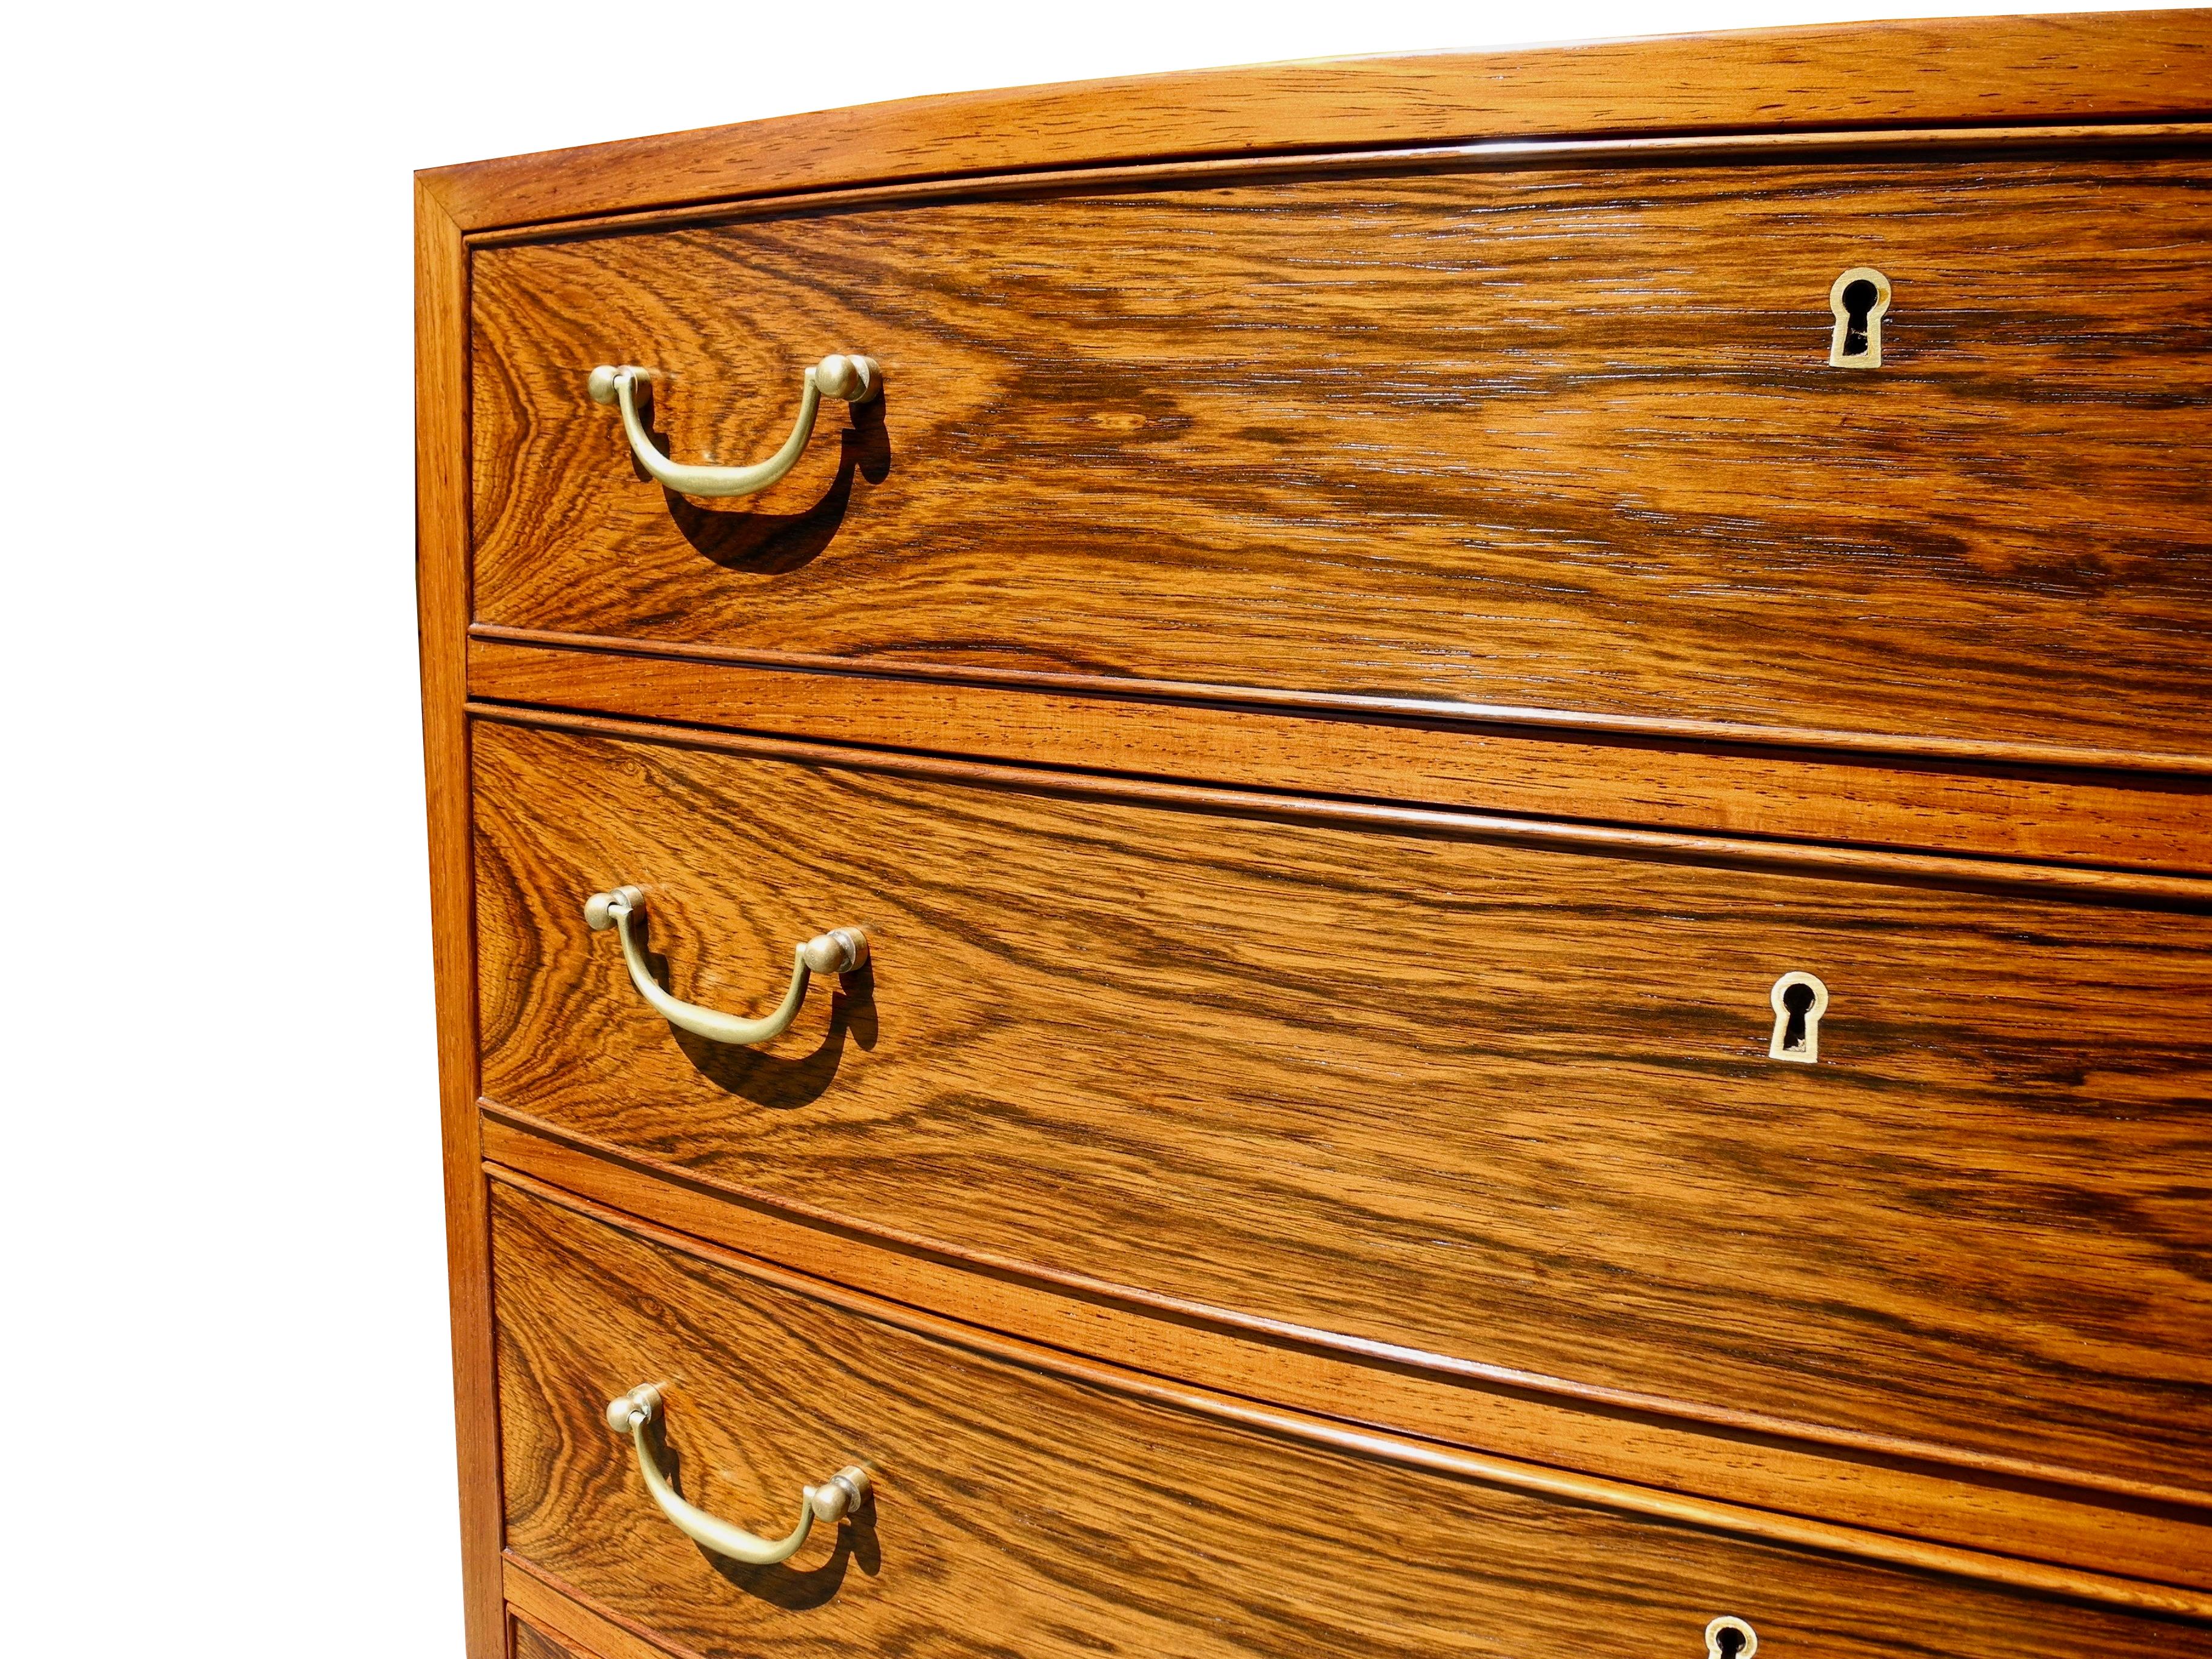 Danish Modern Tall Rosewood Bombe Dresser or Chest of Drawers by Ole Wanscher For Sale 4